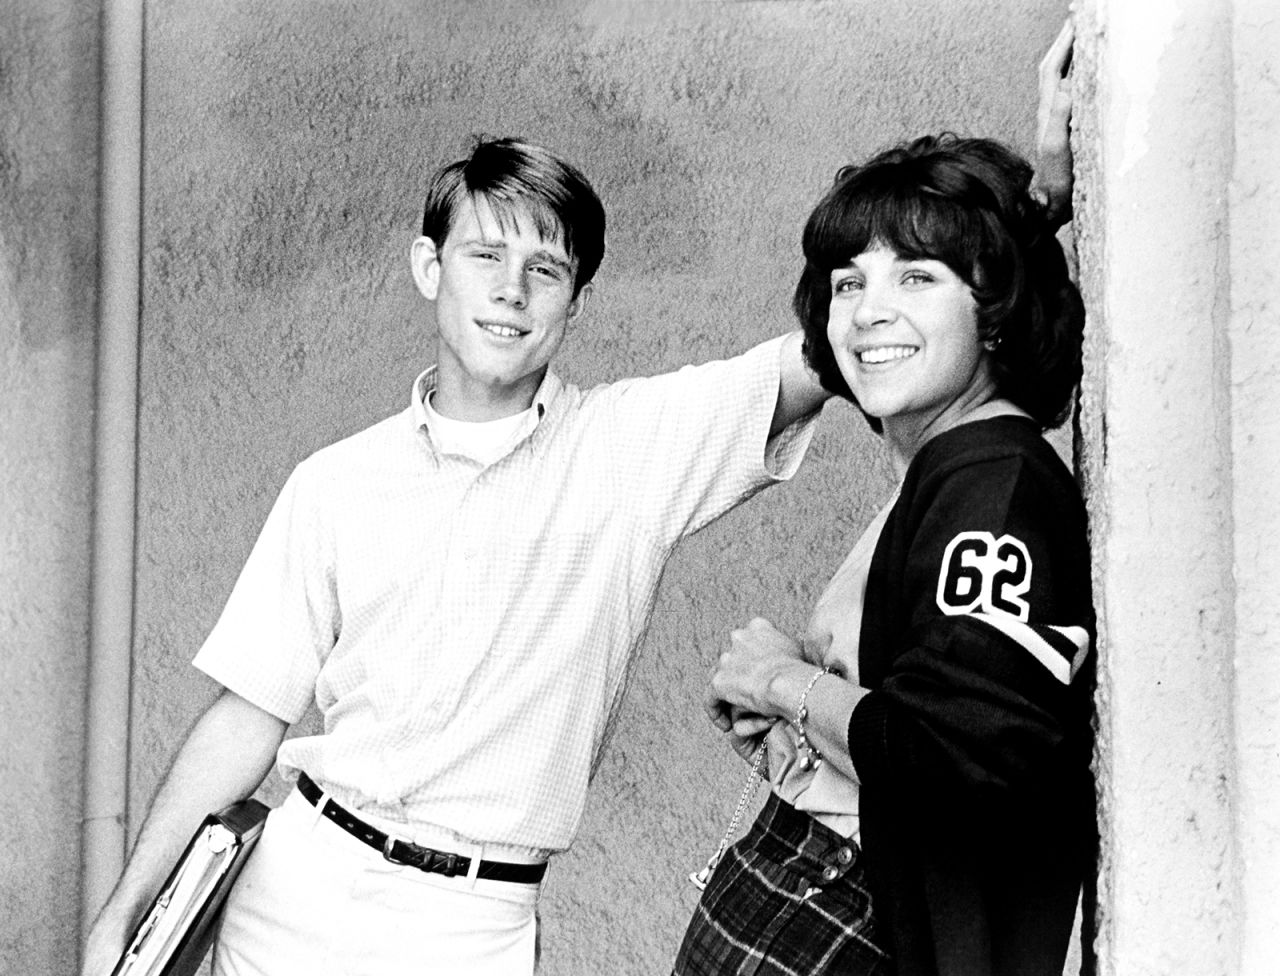 Williams and Ron Howard starred together in the film "American Graffiti" in 1973.